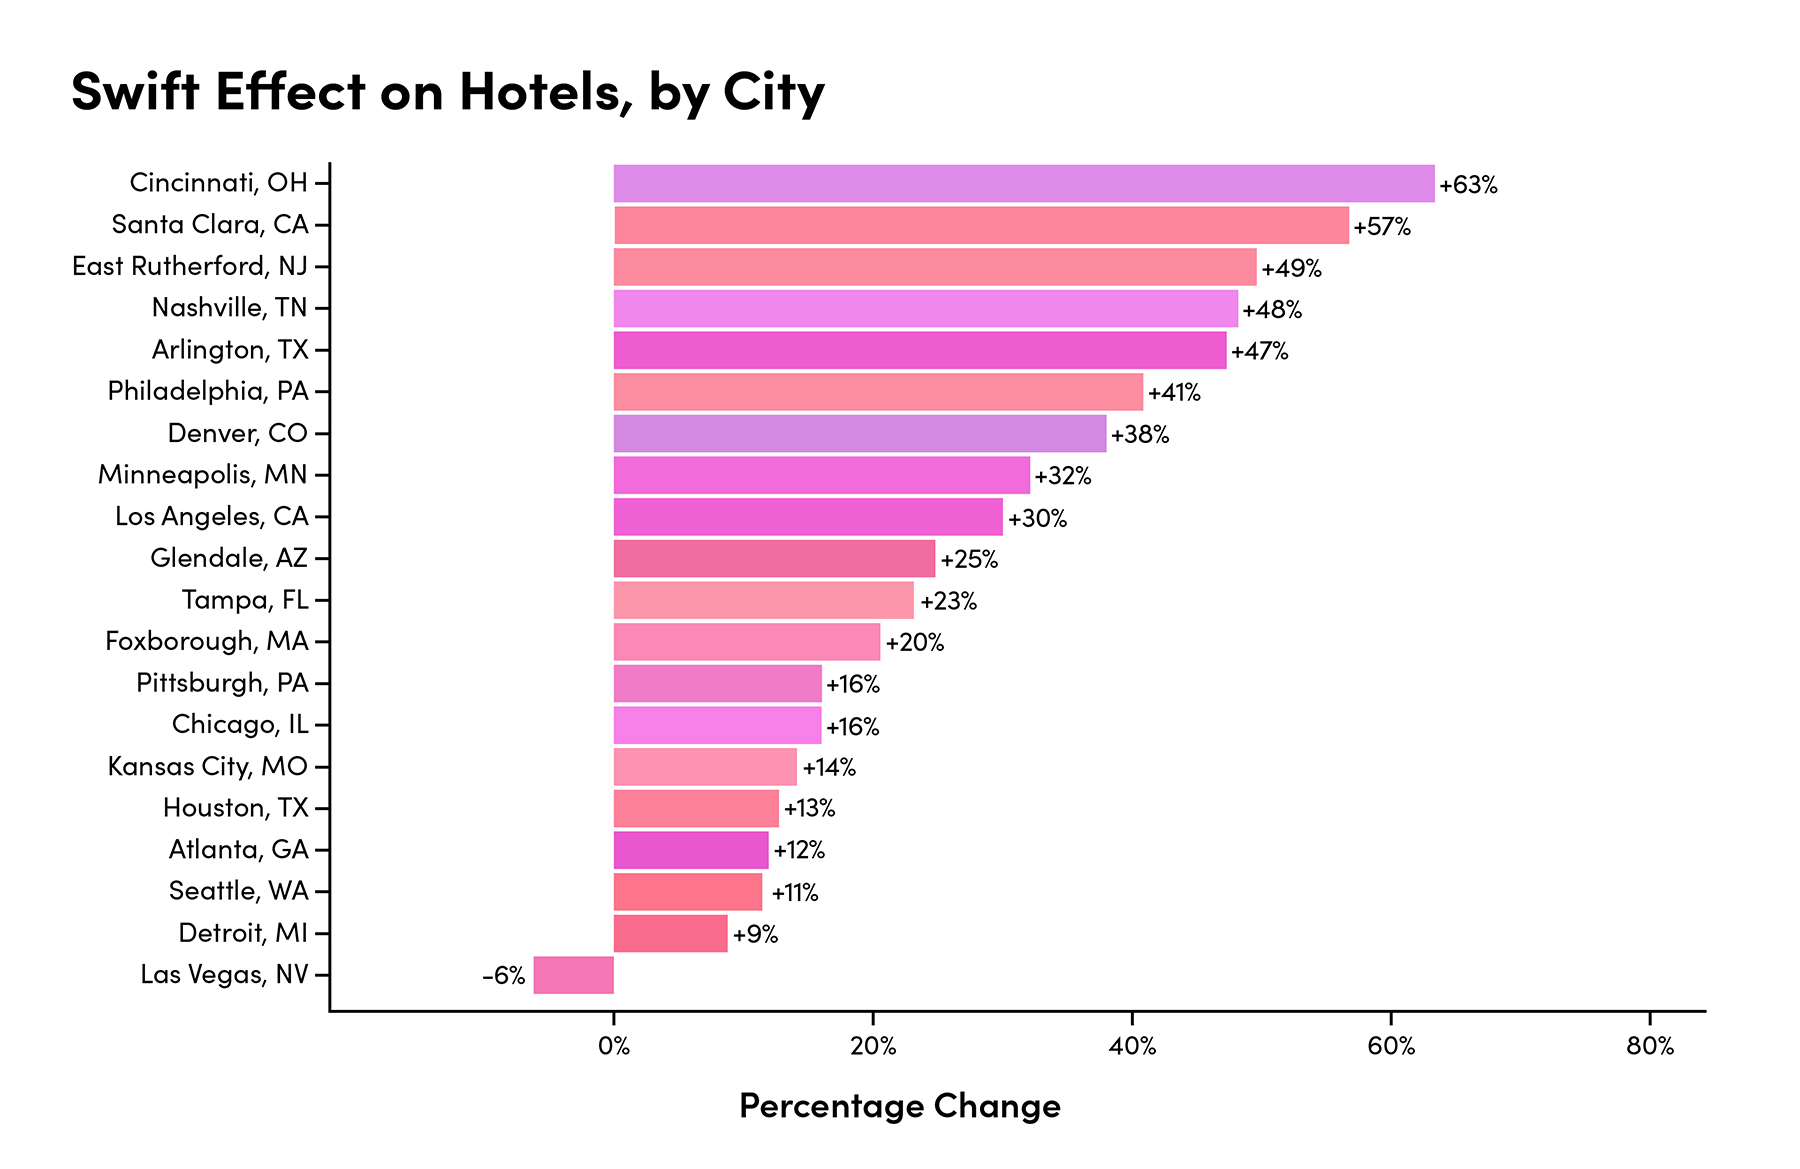 Chart showing Swift Effect on Hotels, by City